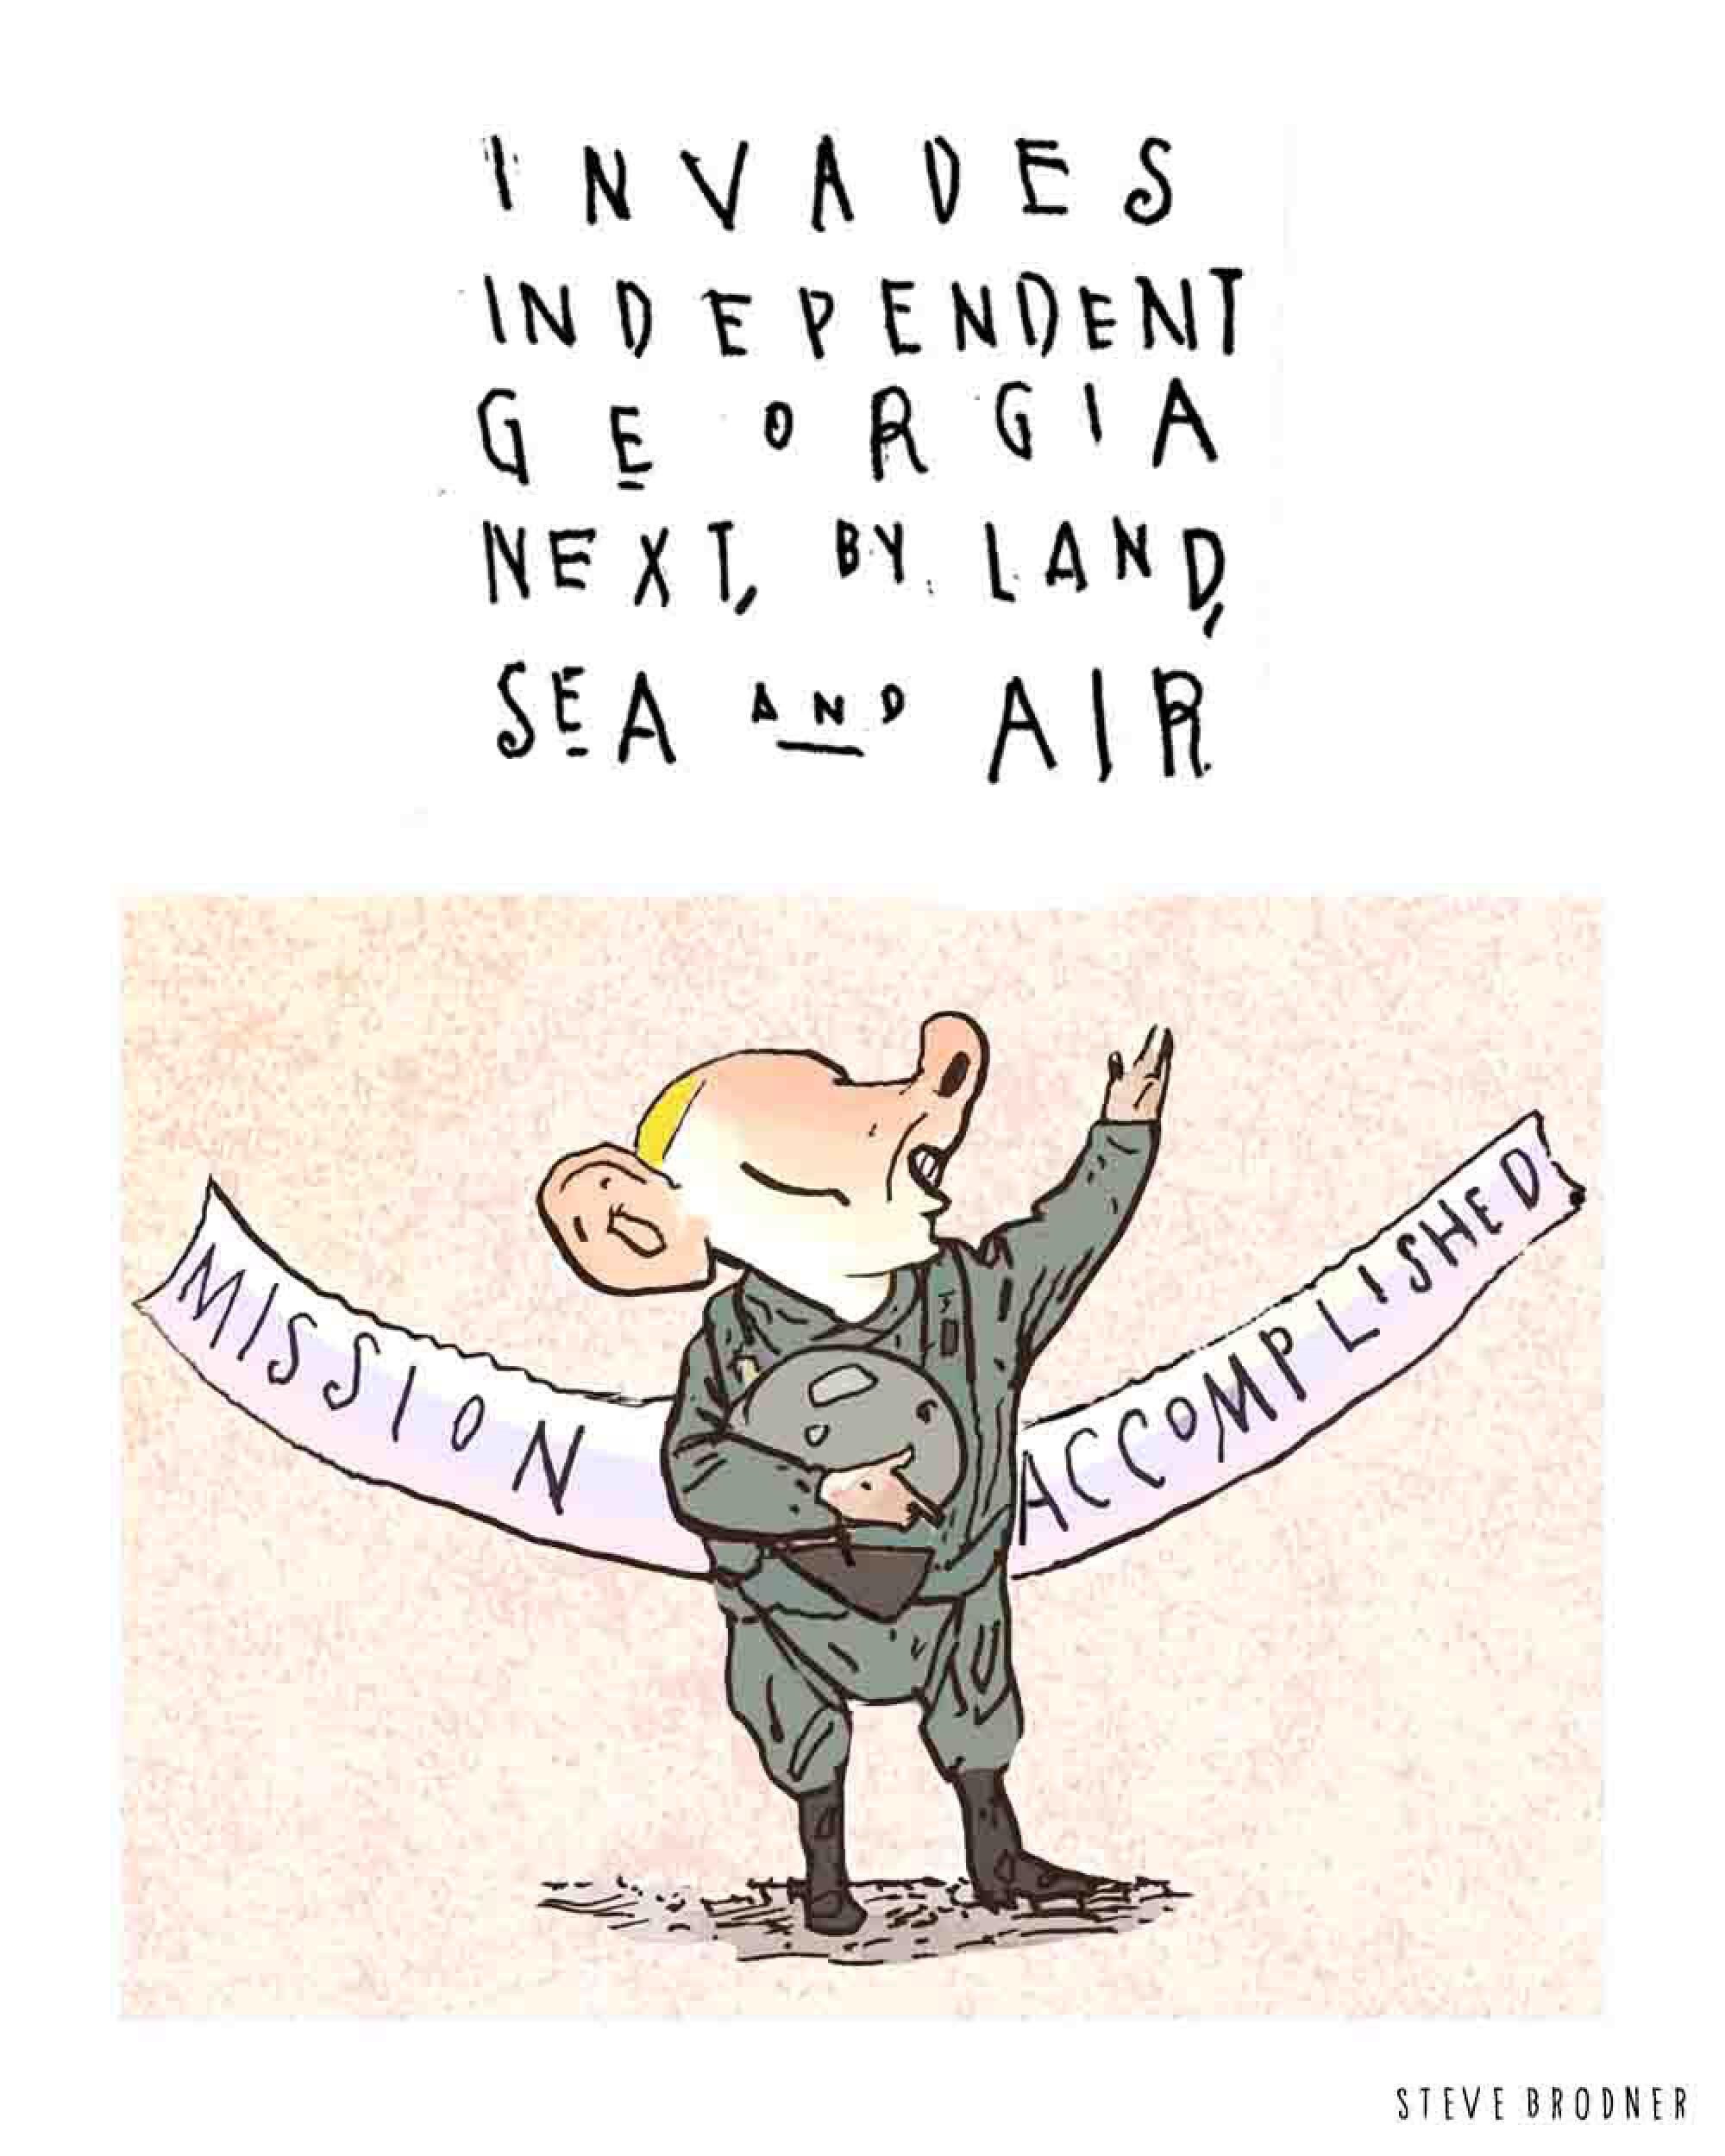 Cartoon of Putin in front of a mission accomplished banner. Text: "Invades independent Georgia next, by land, sea and air"